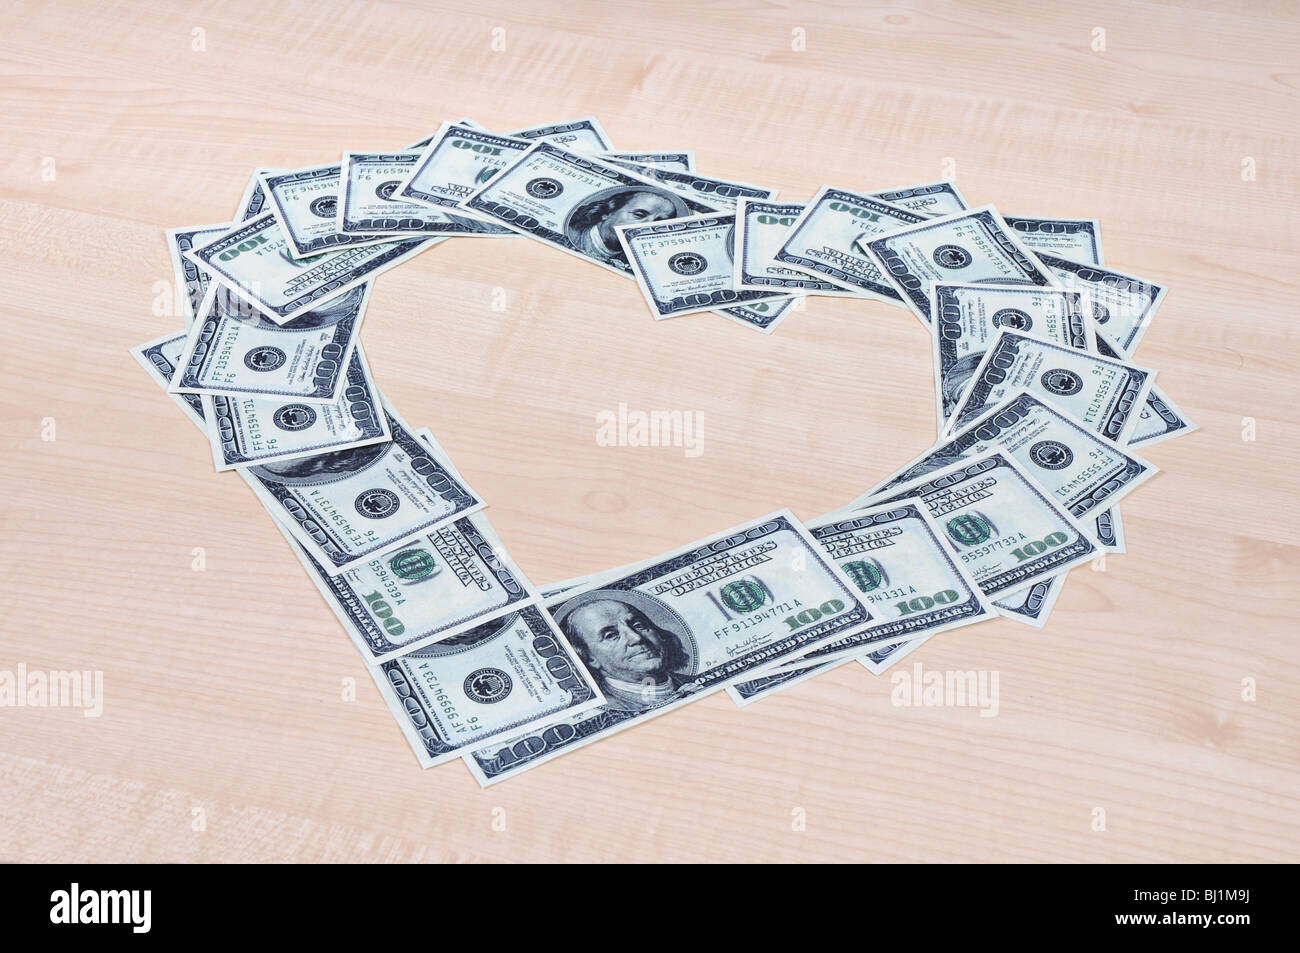 Heart symbol made of 100 dollar bills lying on a table. Stock Photo